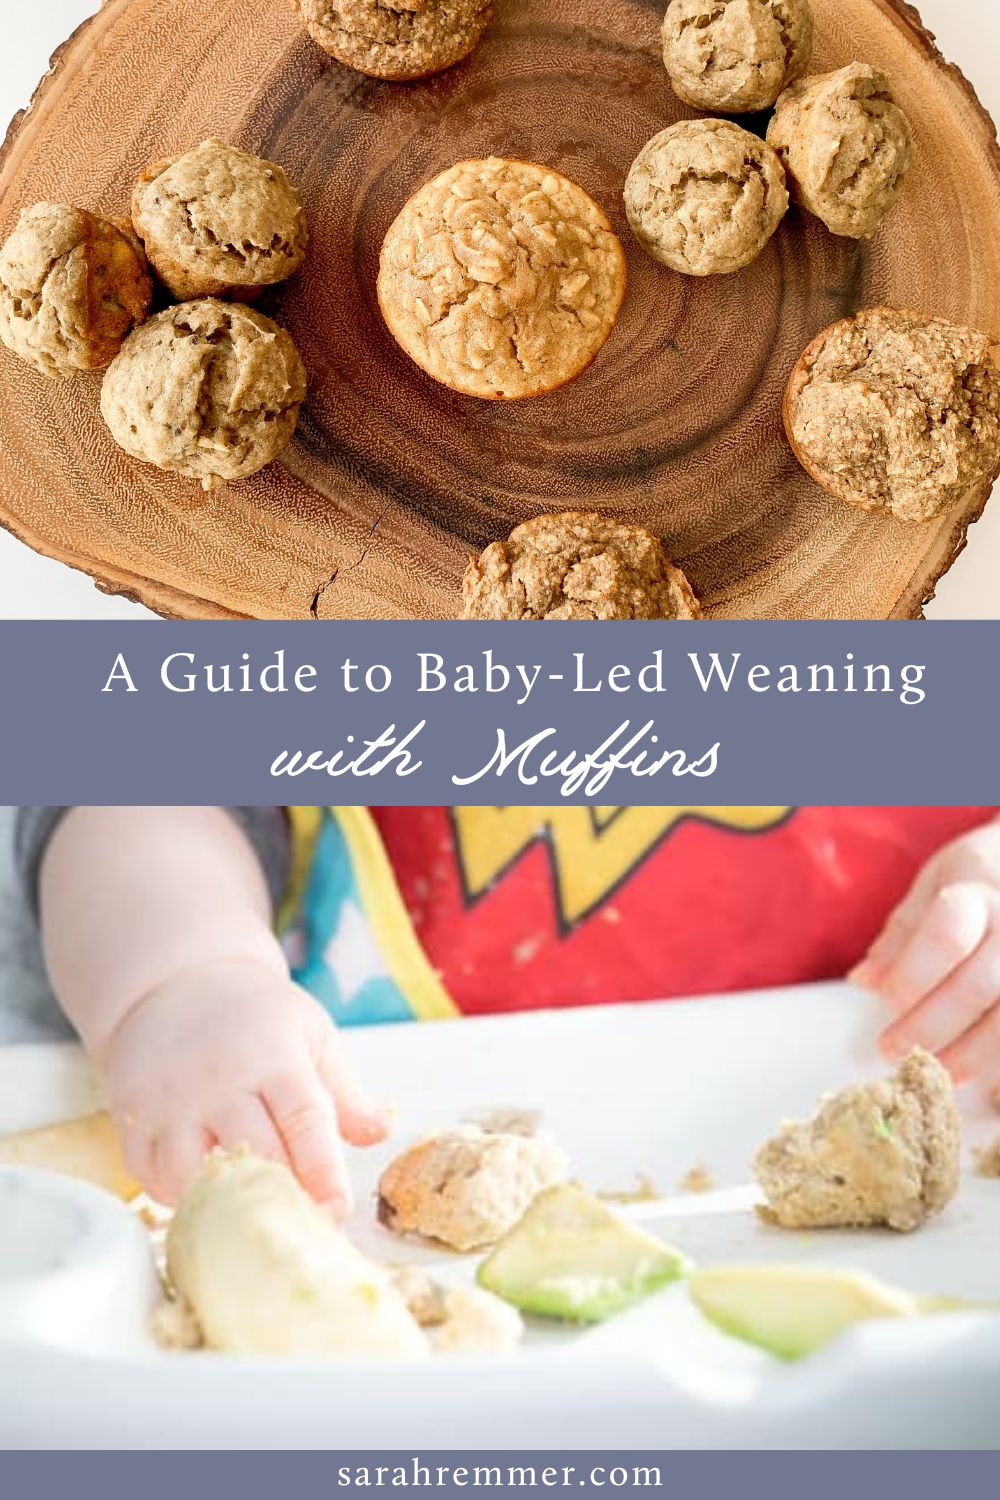 Here is everything you need to know about baby-led weaning with muffins, from a registered dietitian. This post will show you how to introduce muffins to your baby.